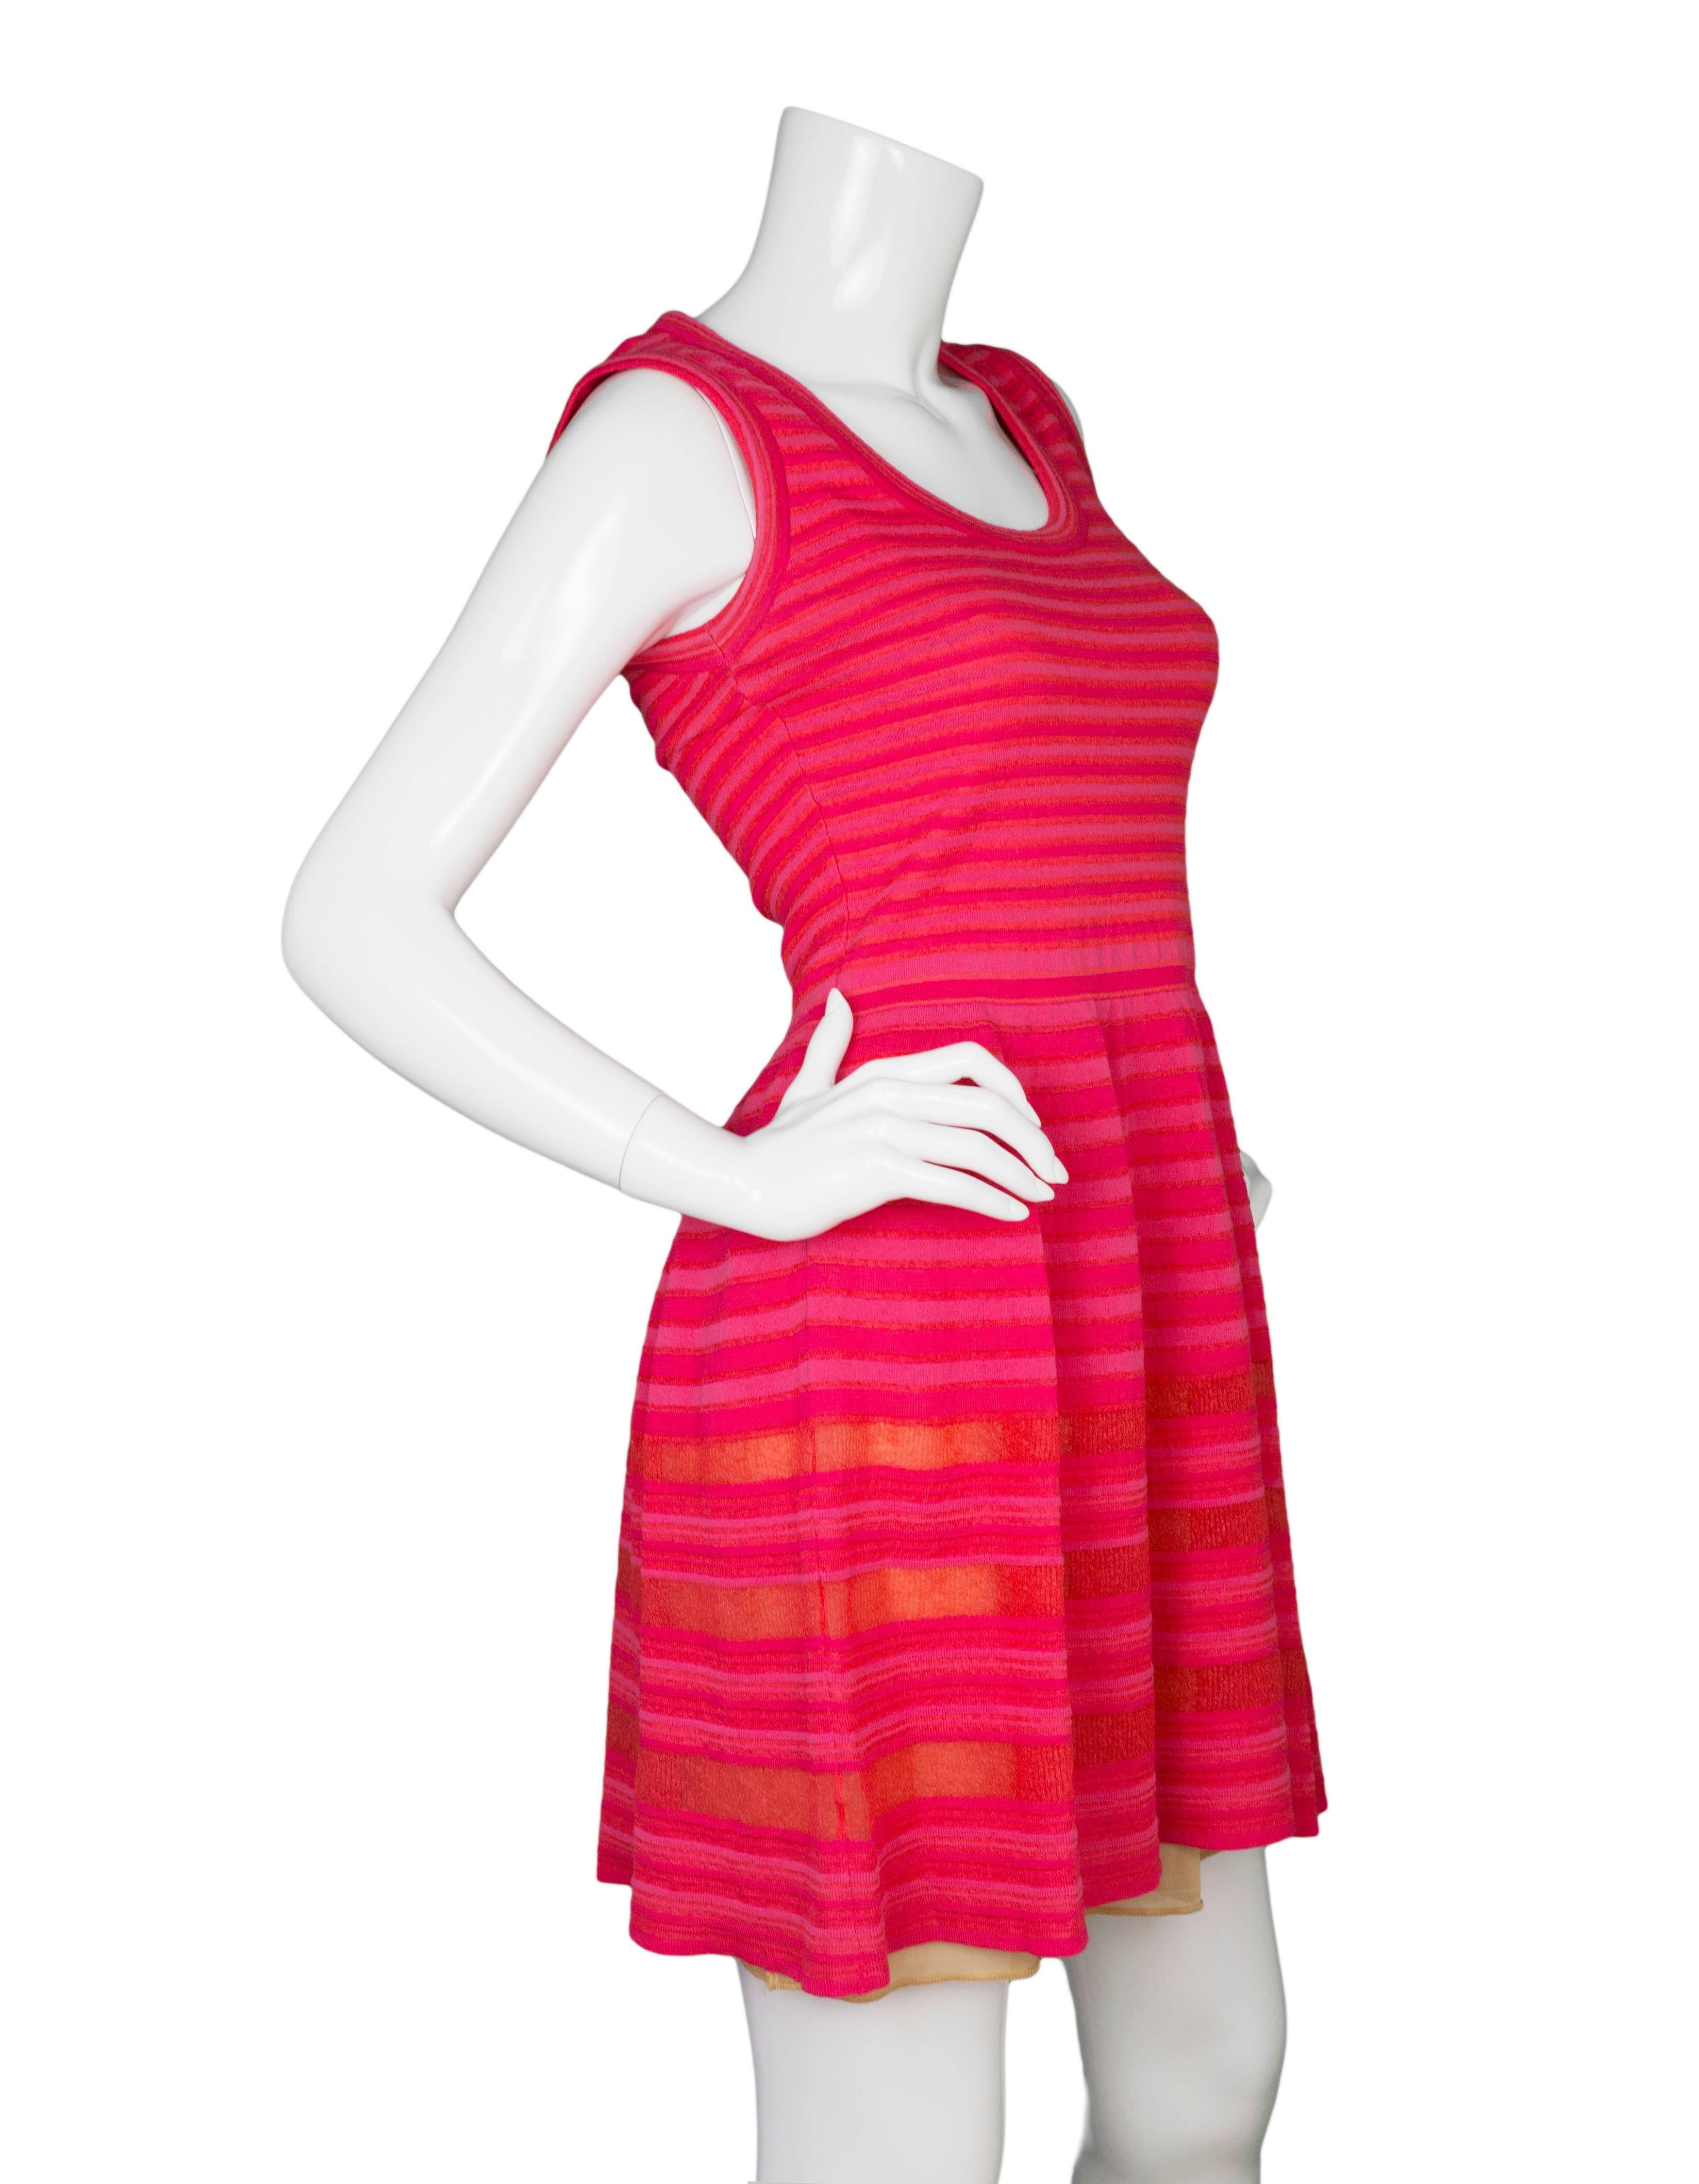 M Missoni Coral Sleeveless Fit Flare Dress
Features metallic stripes throughout 

Made In: Italy
Color: Coral
Composition: Not given- believed to be a poly-blend
Lining: Nude poly-blend
Closure/Opening: Pull over
Exterior Pockets: None
Interior